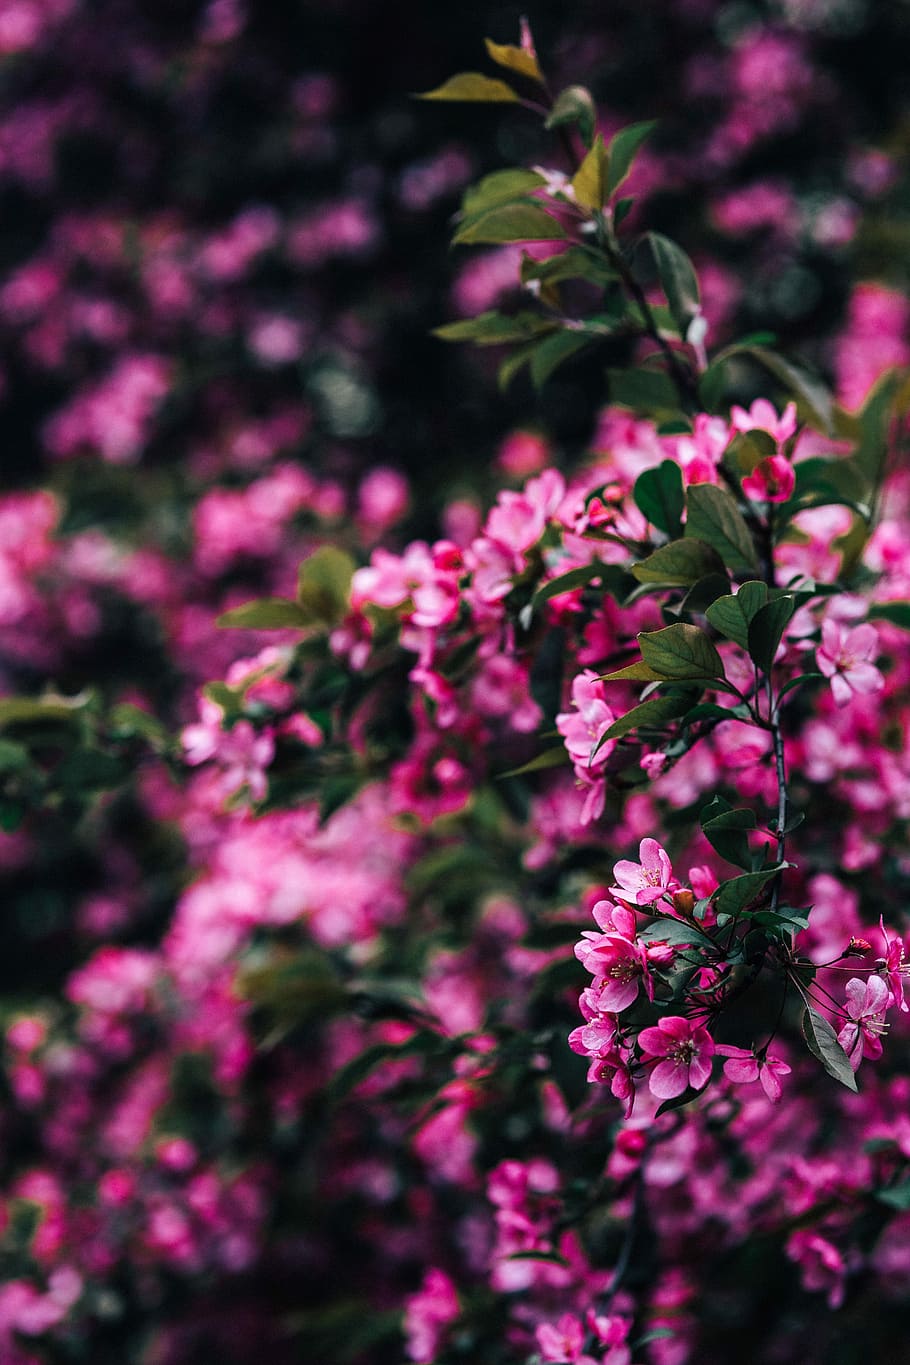 Lovely pink flowers blooming from the tree branches, copy space